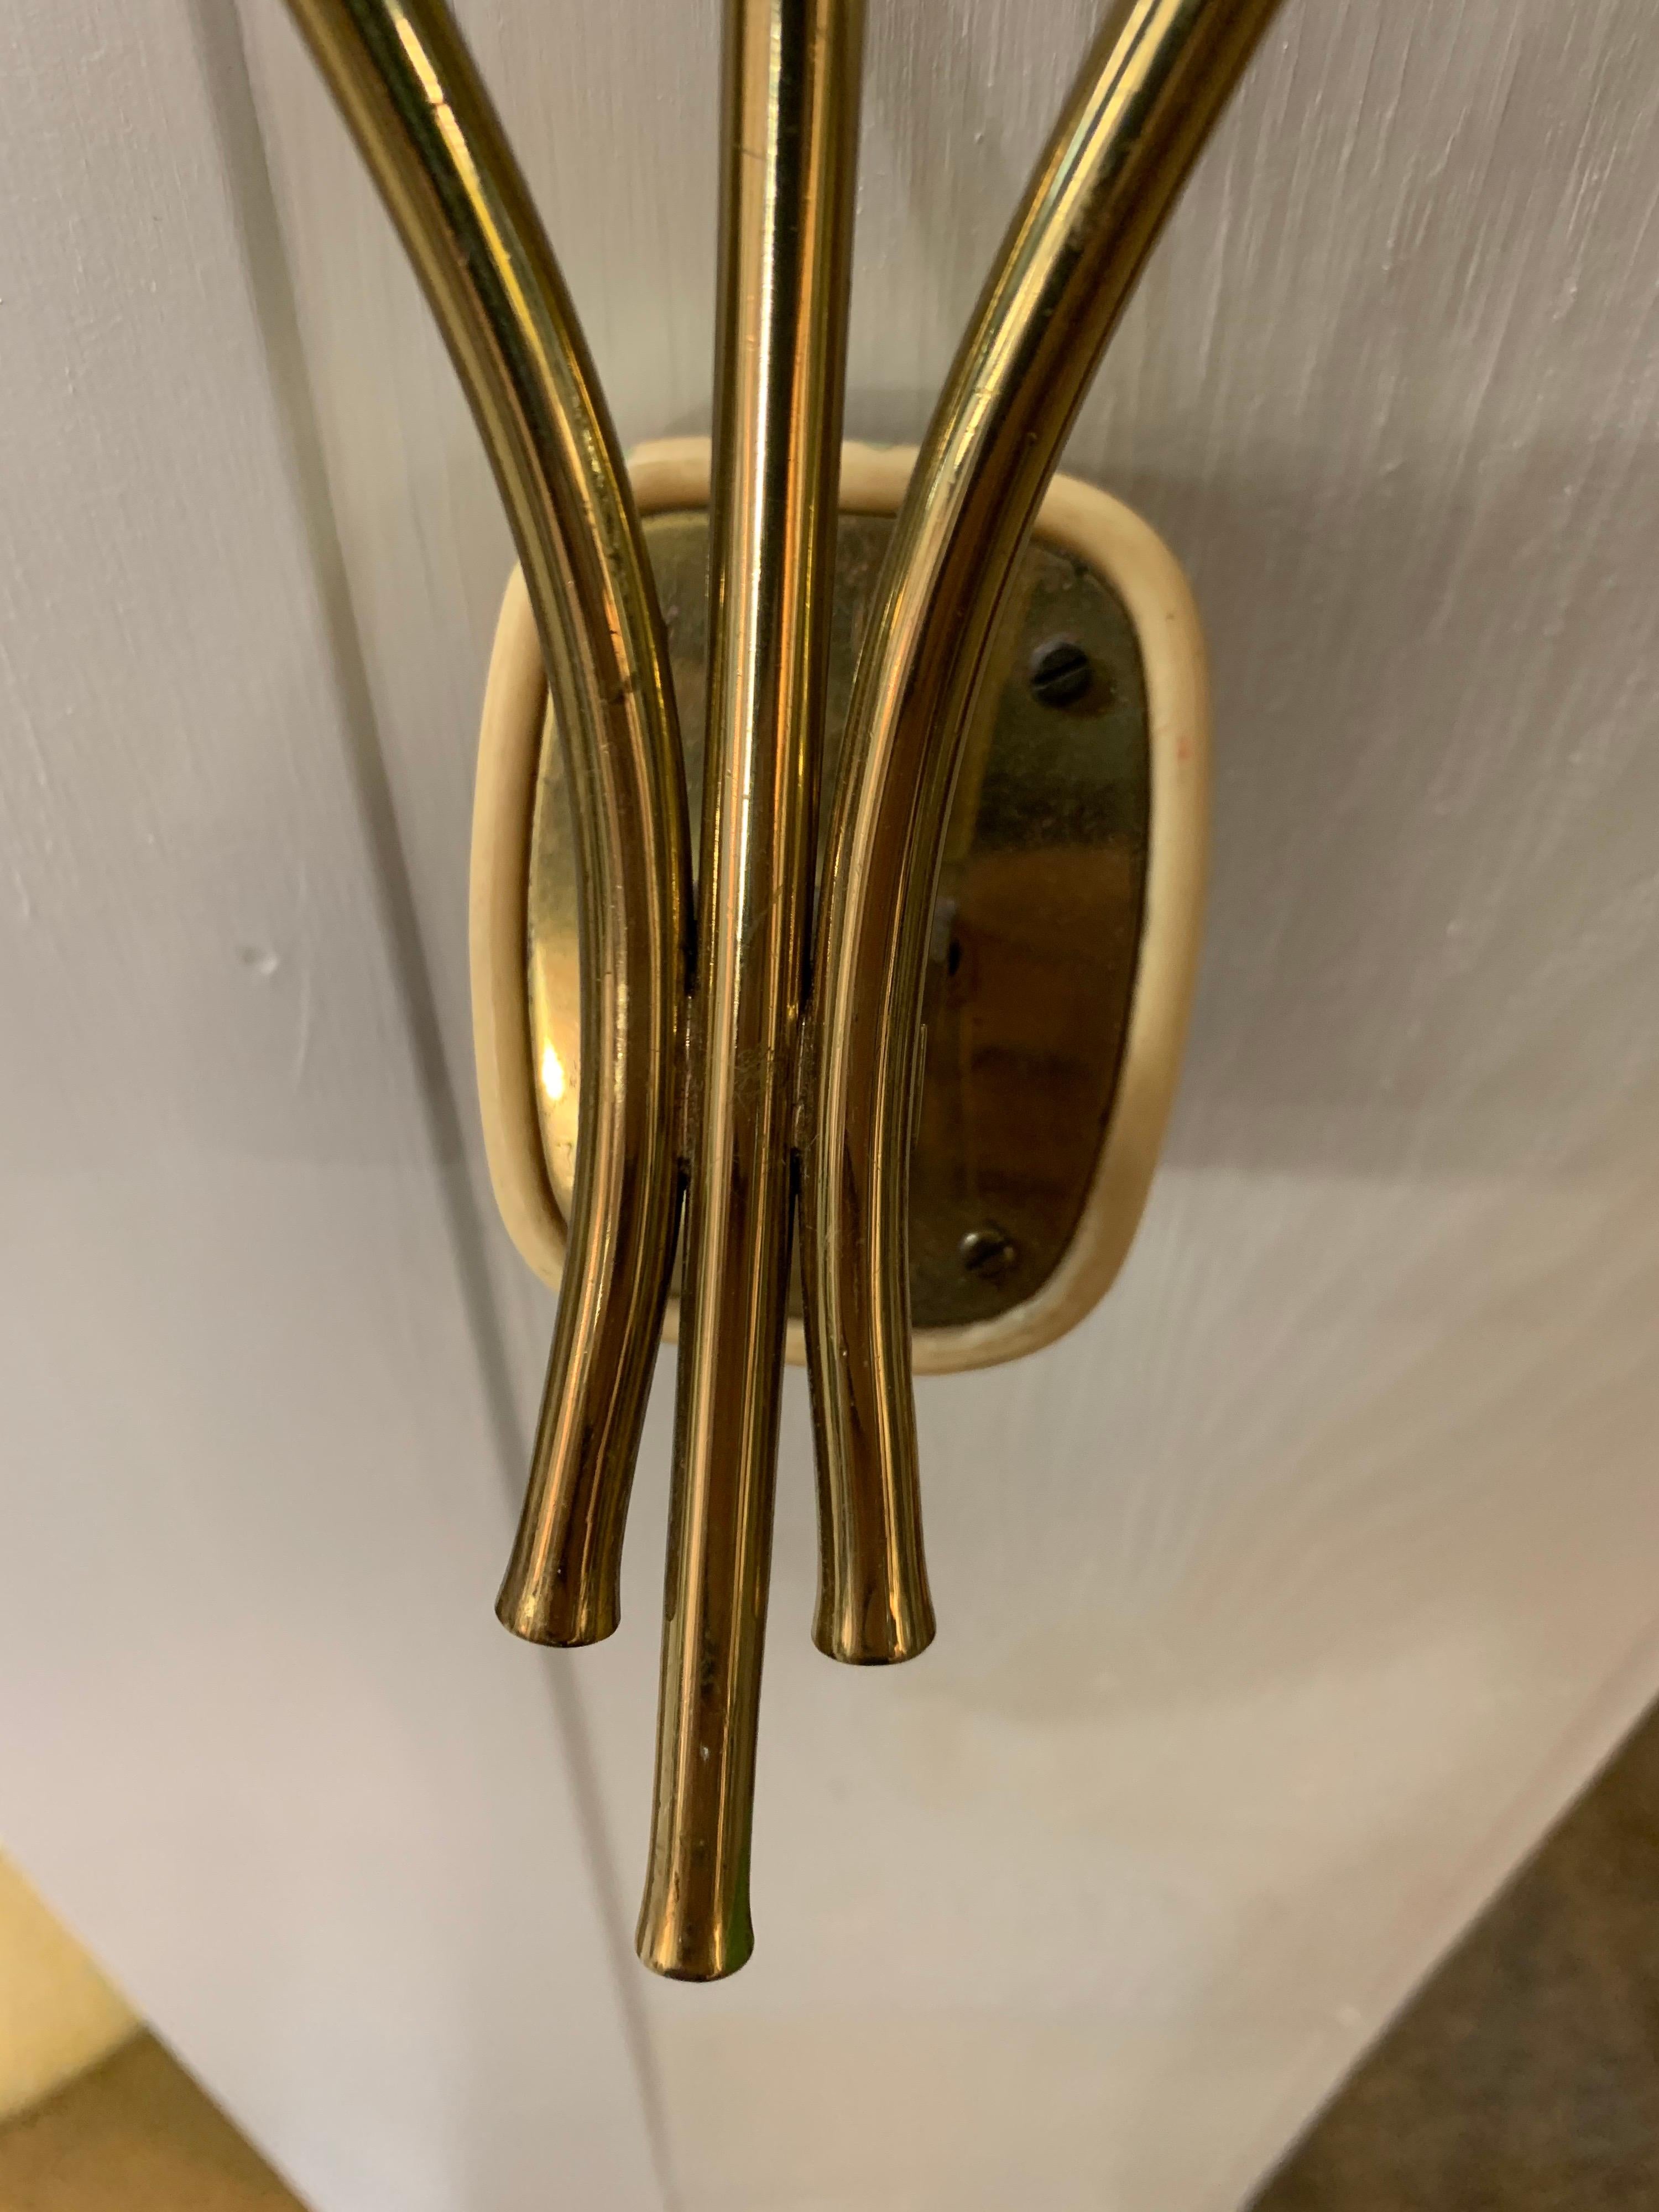 American Mid-Century Modern Brass and Glass Floral Wall Sconce Light